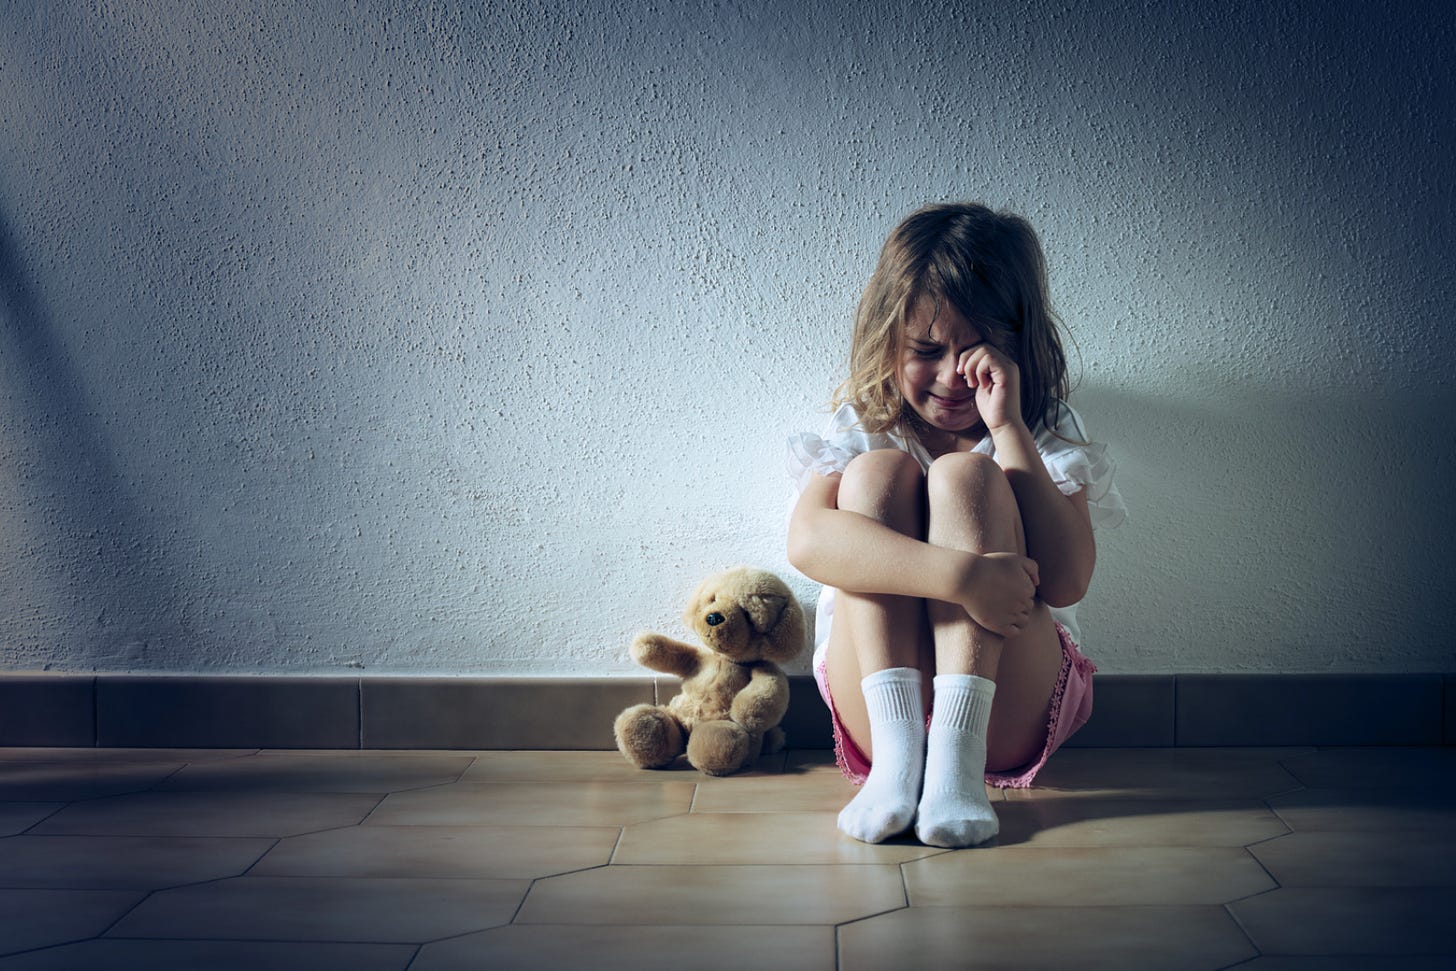 Girl alone crying with teddy bear